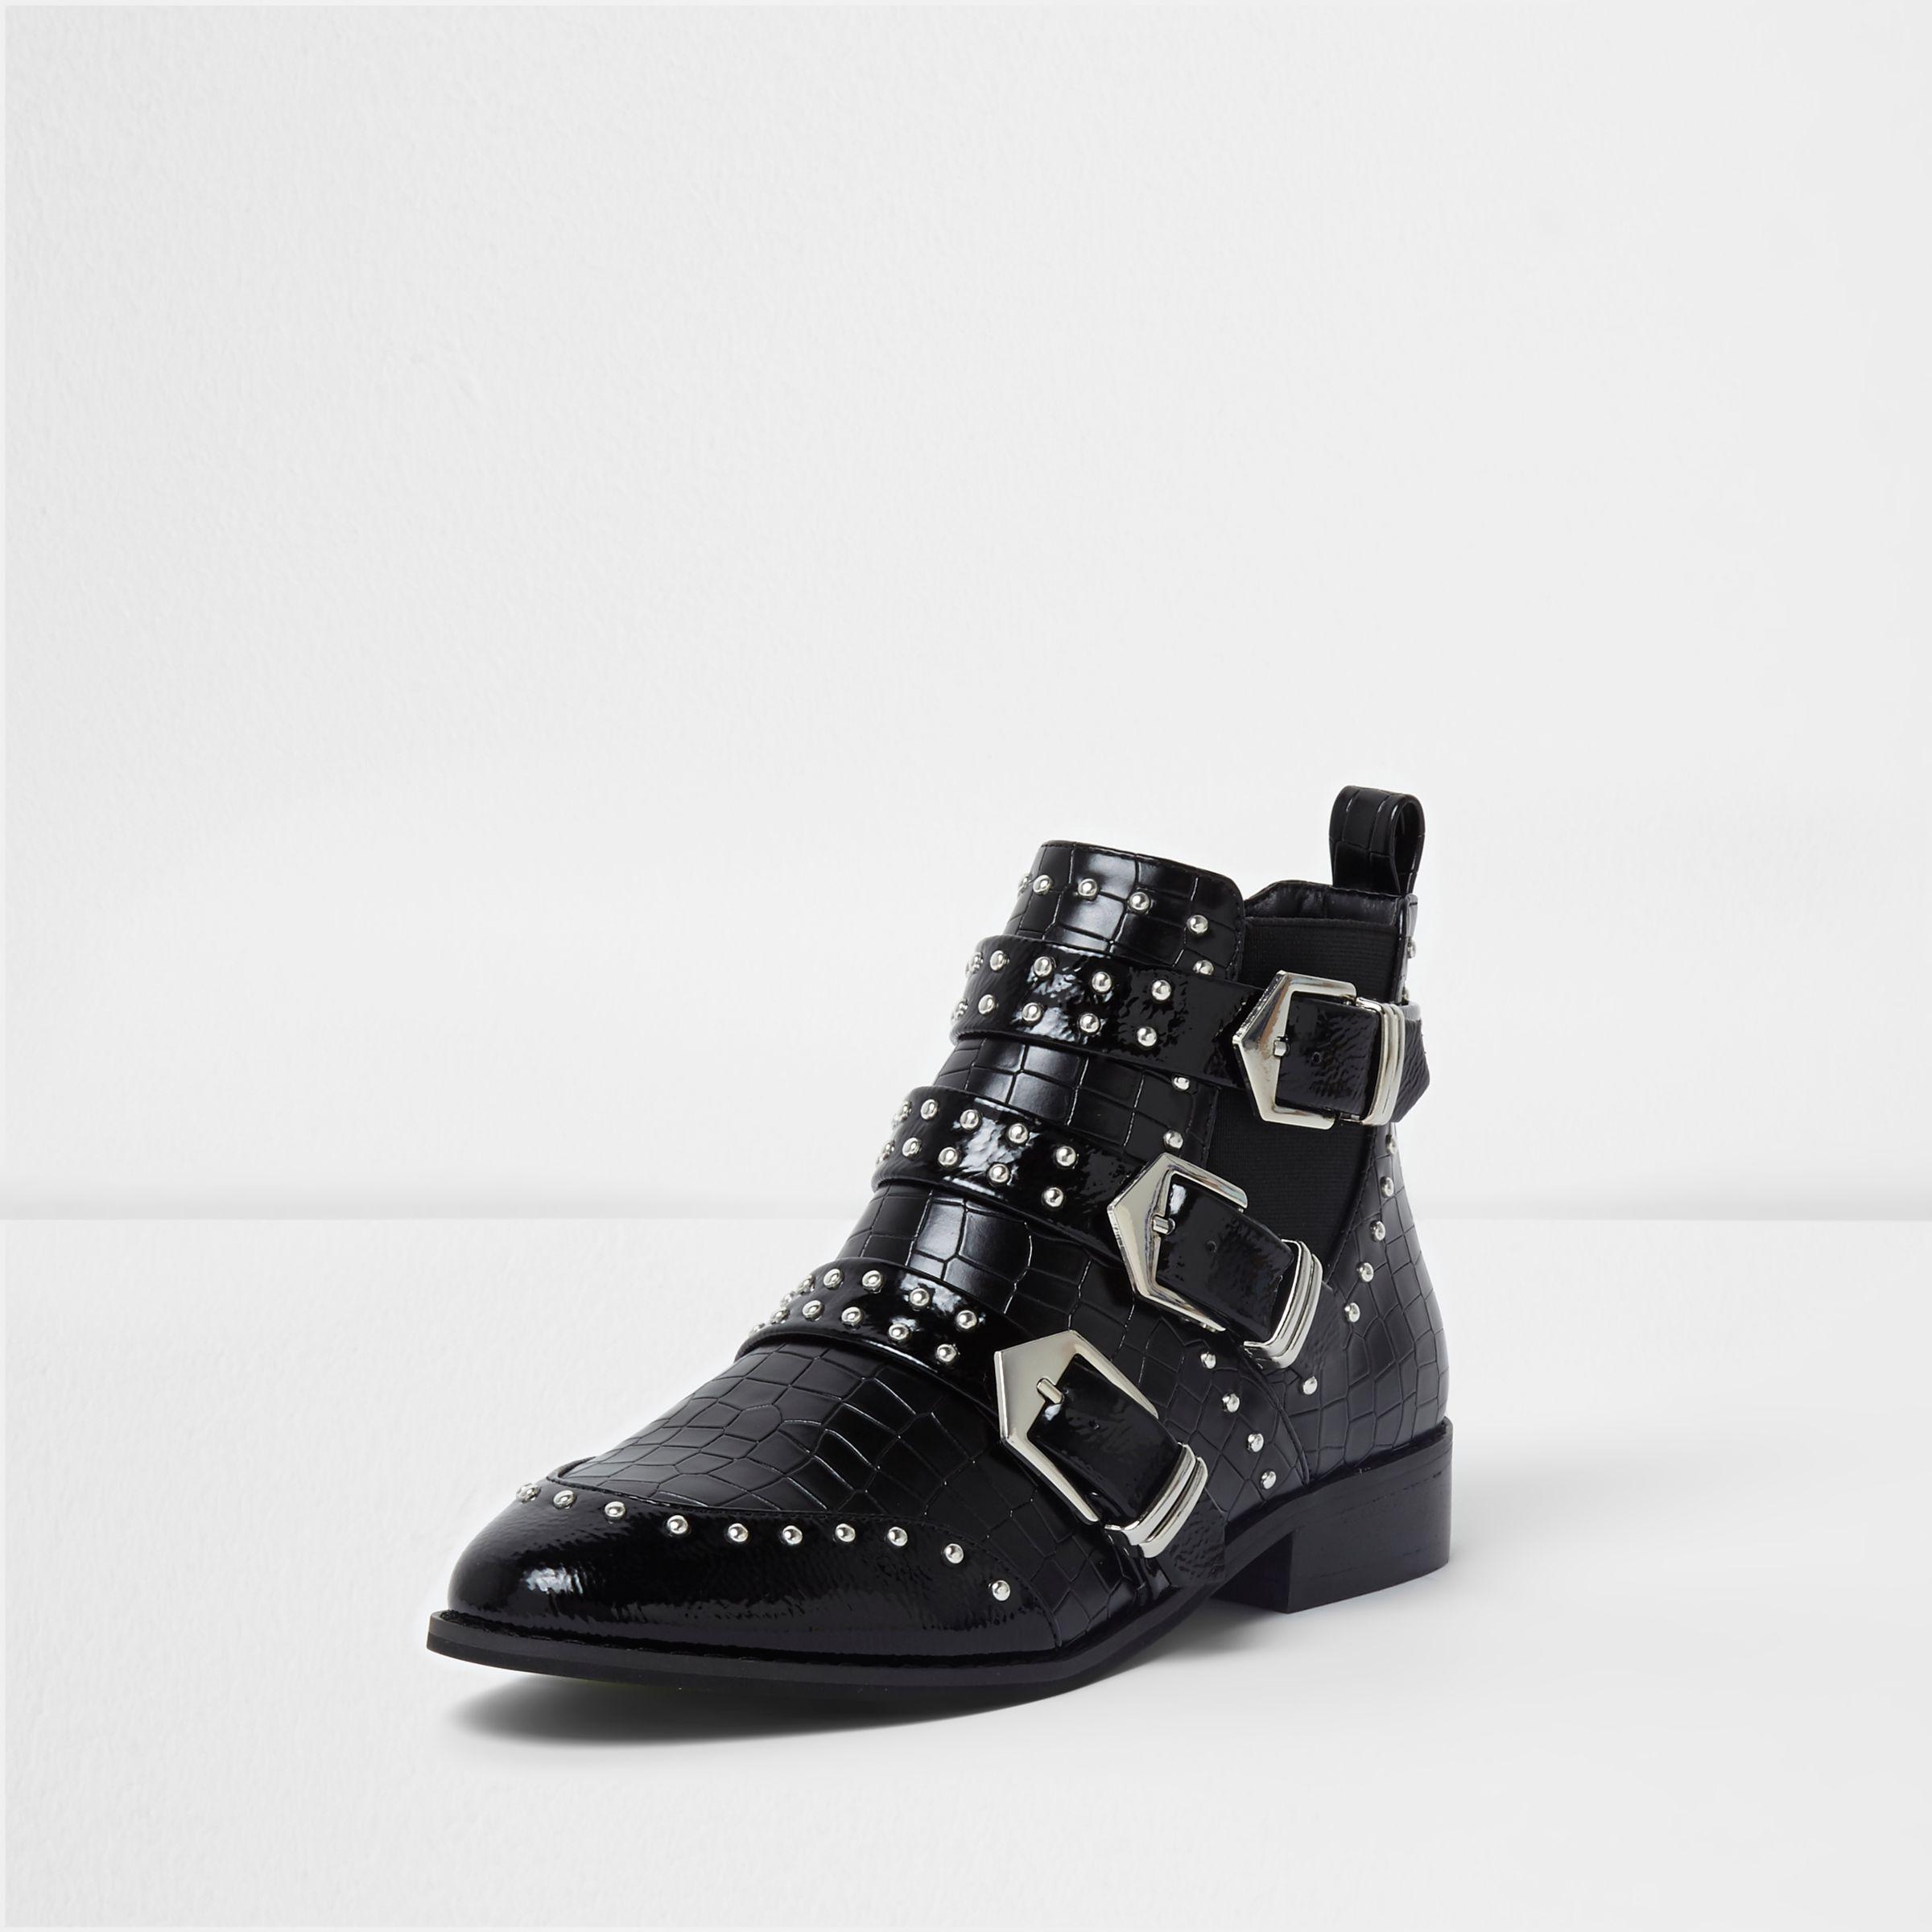 River Island Black Studded Multi Buckle Ankle Boots - Lyst